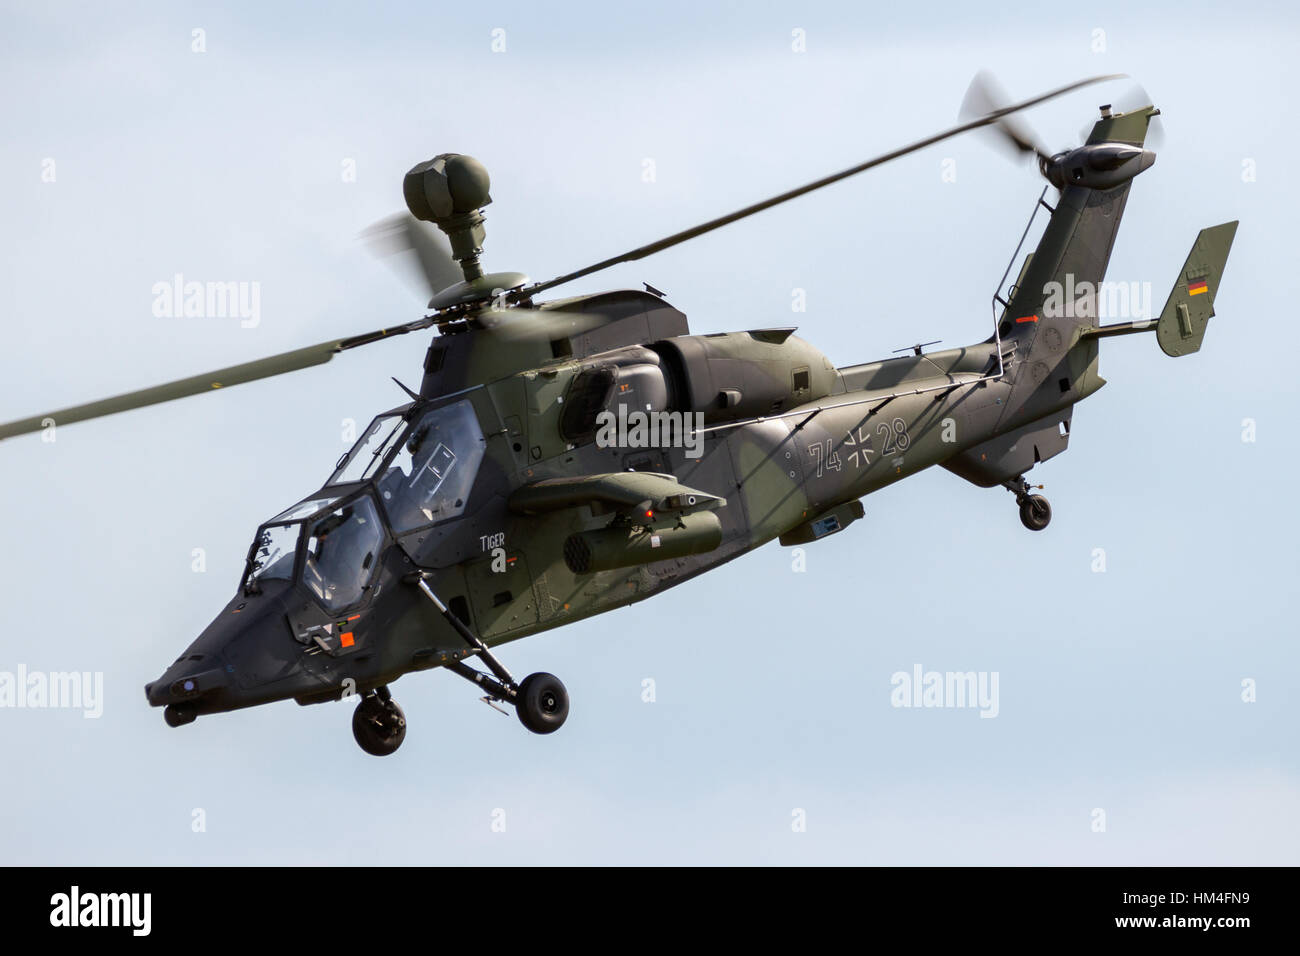 BERLIN - JUN 2, 2016: German Army Eurocopter EC665 Tiger attack helicopter flyby during the Berlin Airshow ILA at Berlin-Schoneveld airport Stock Photo